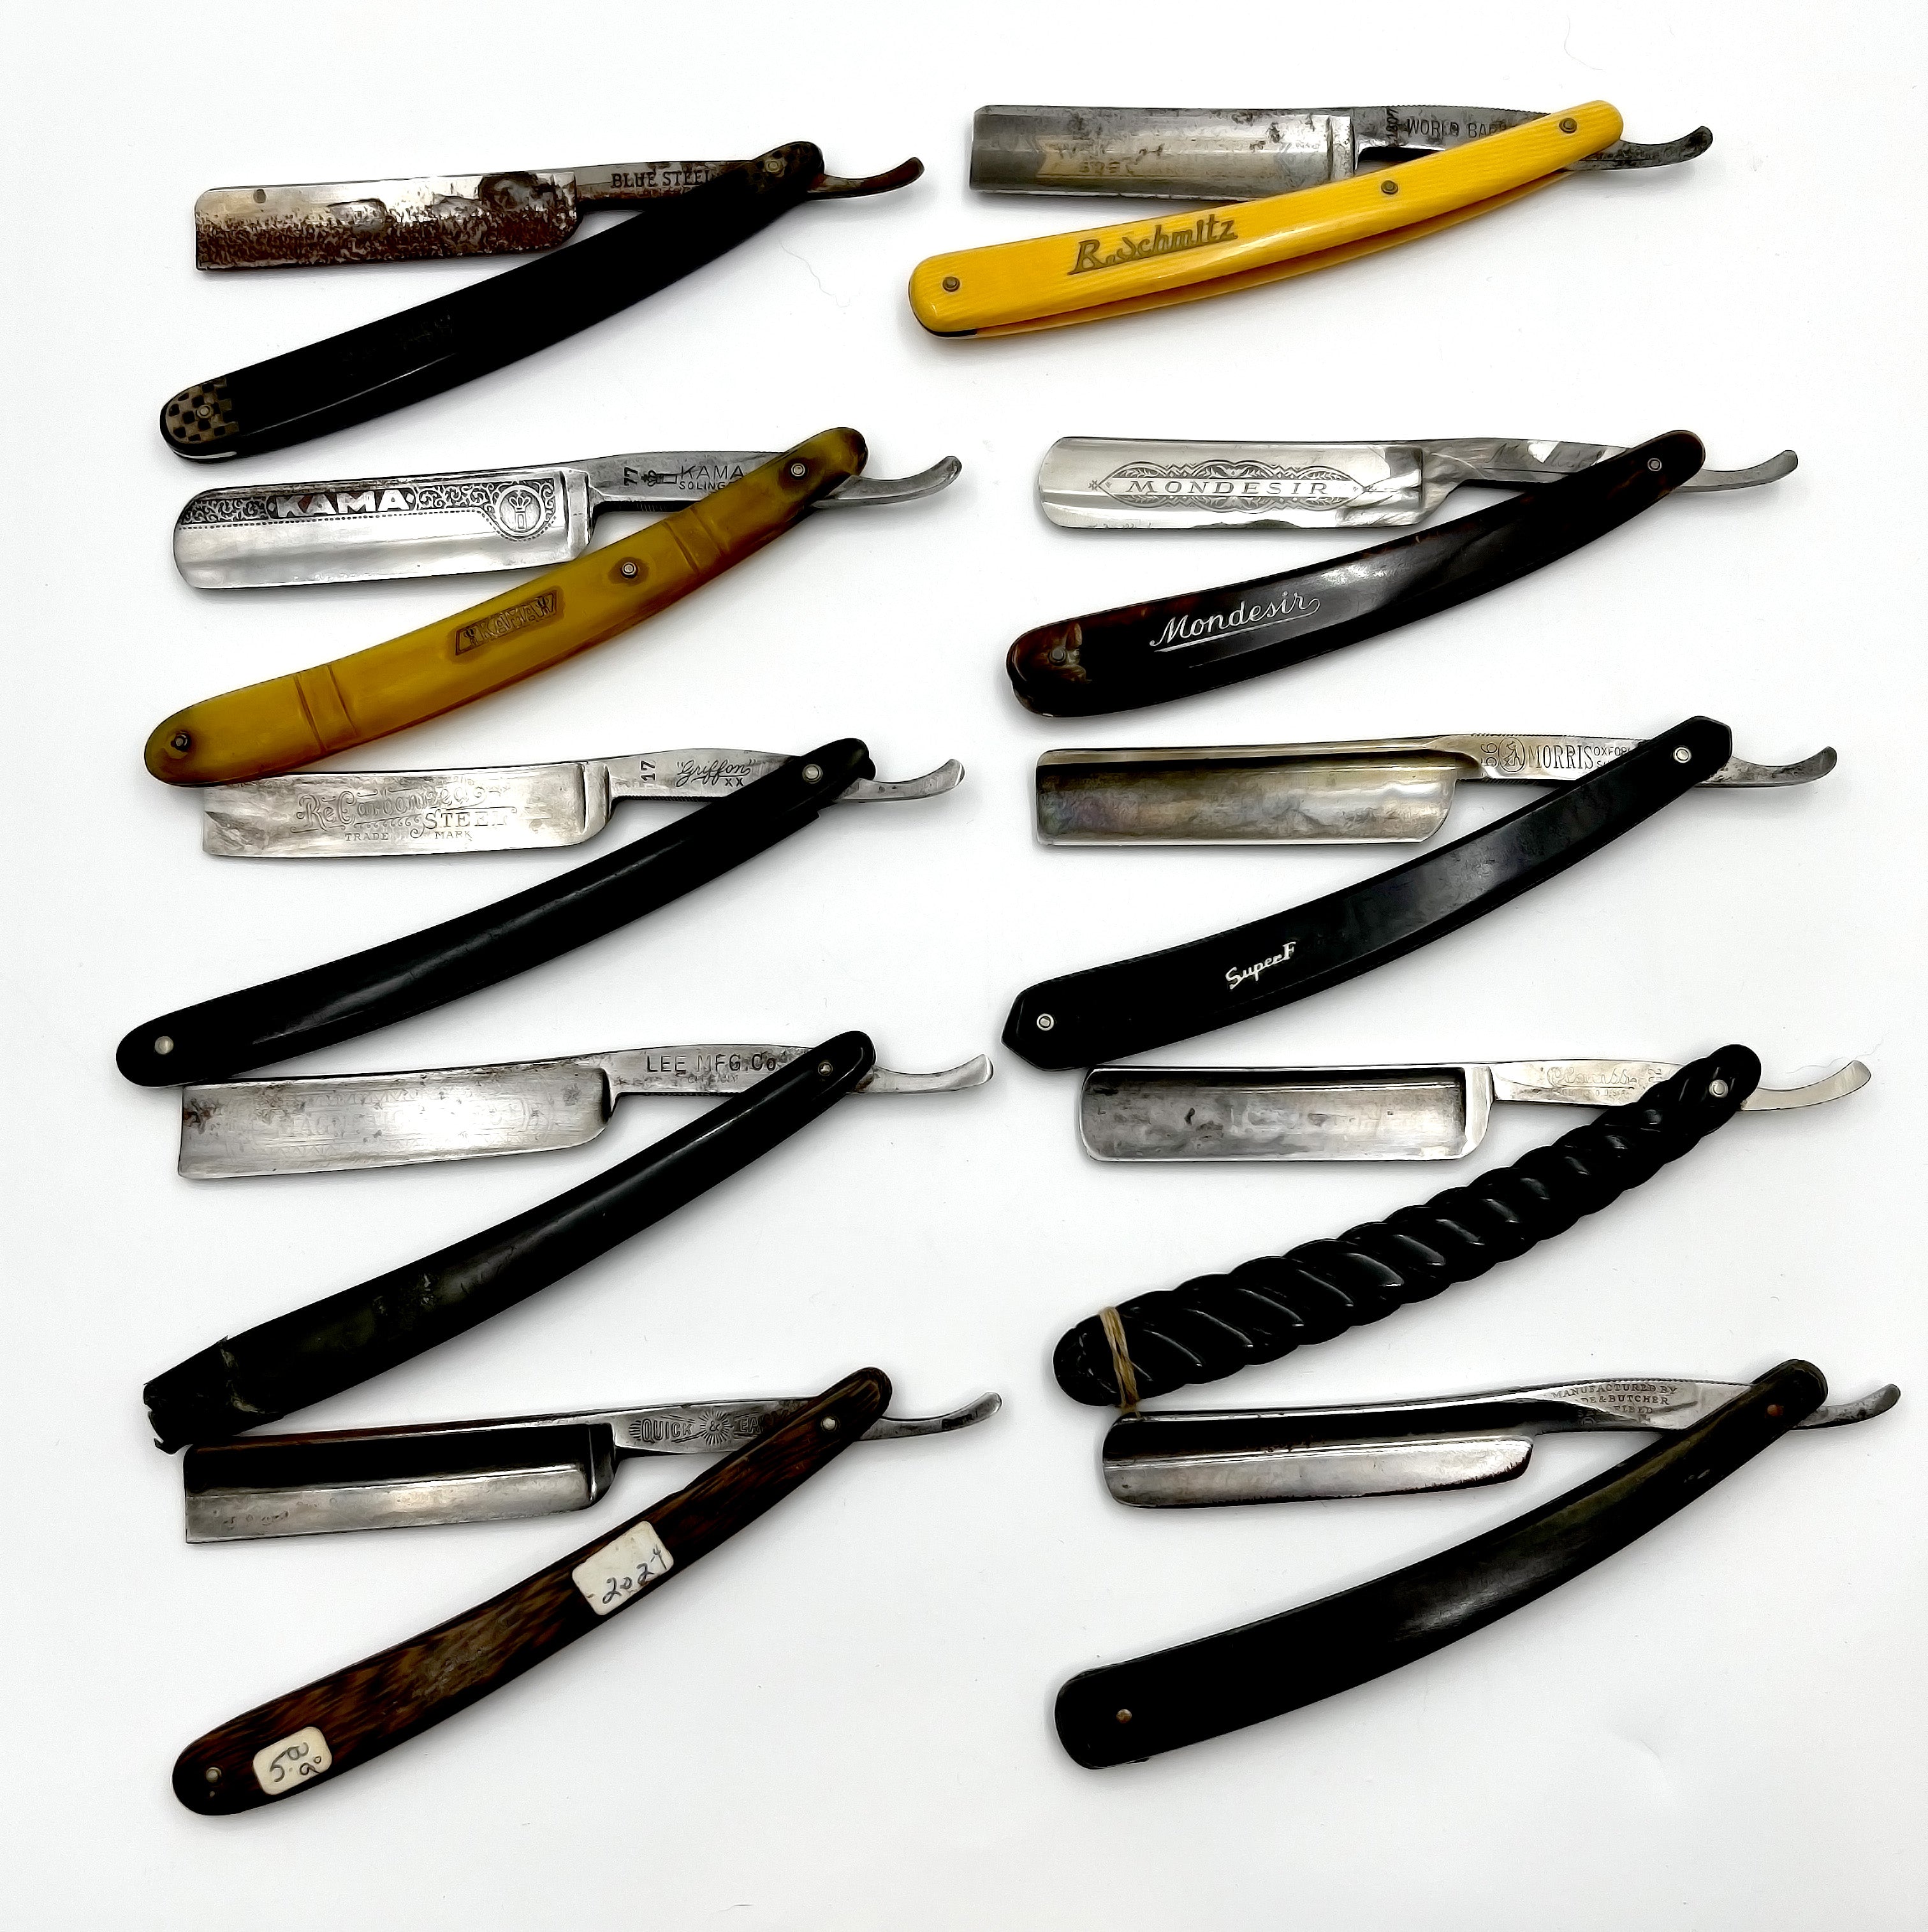 Vintage 10 Straight Razor Lot #34 - May Contain Sheffield, Solingen & USA makers, as pictured